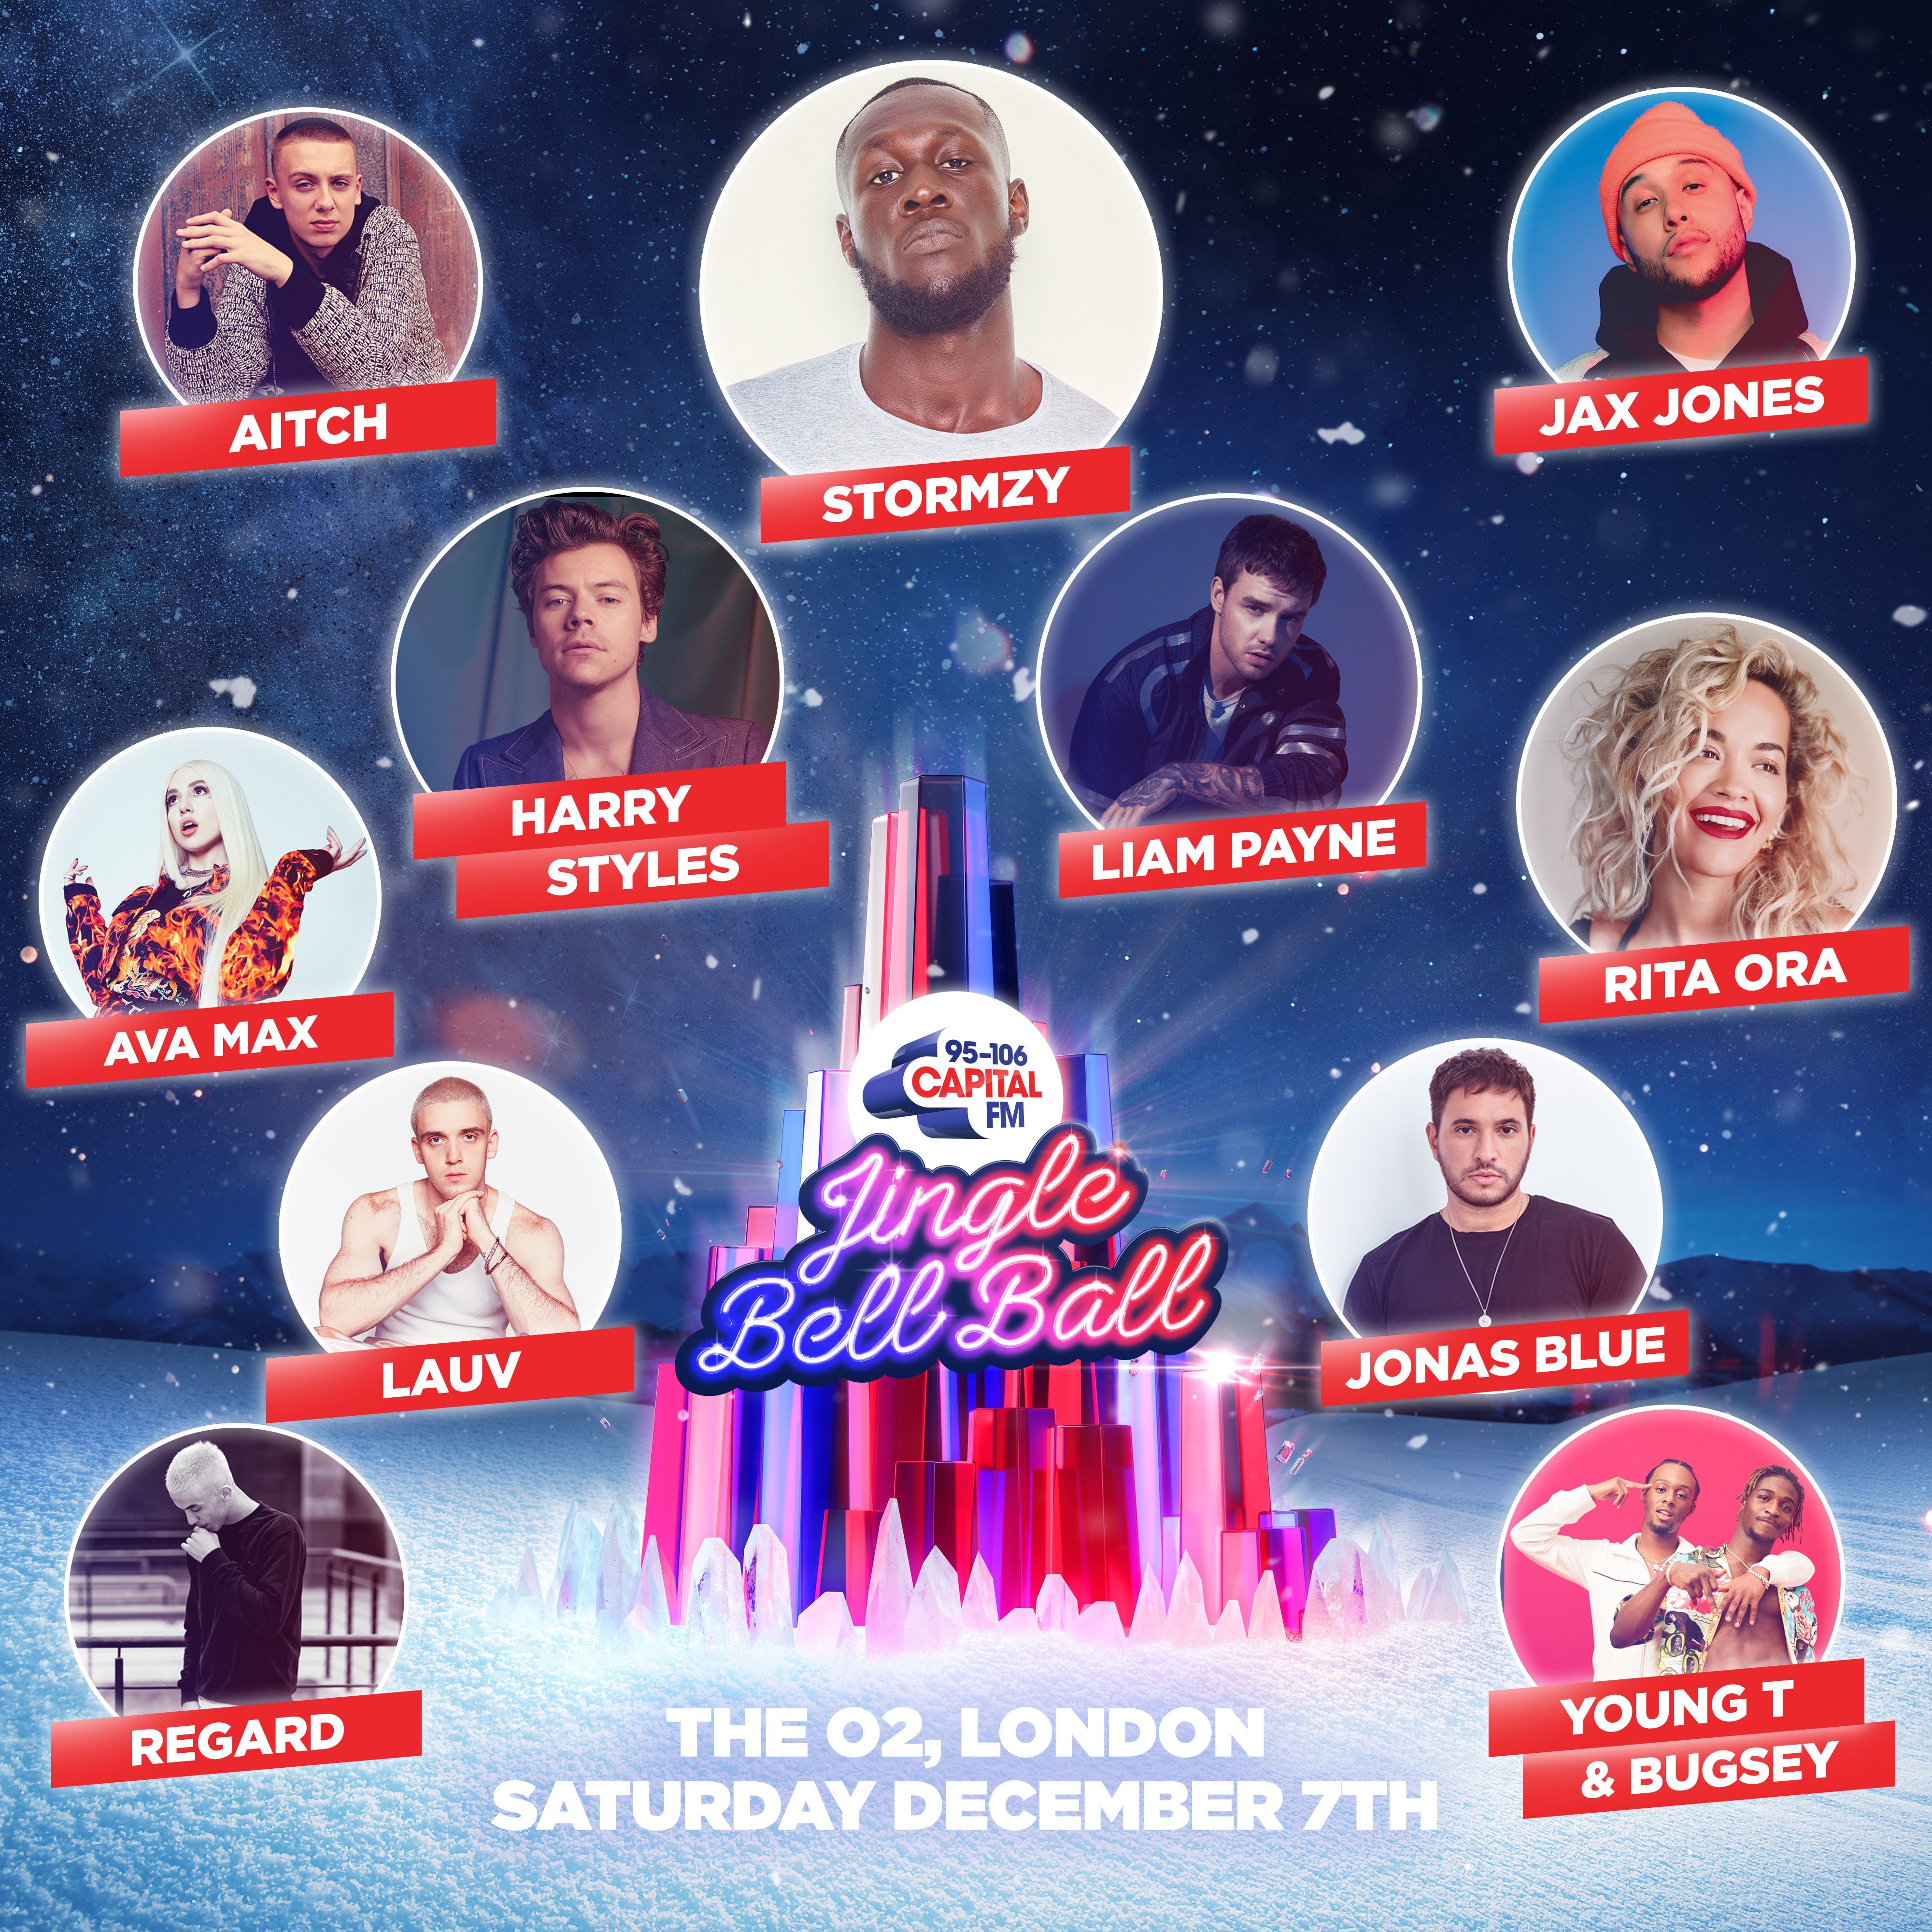 Jingle Bell Ball 2019 at O2 Arena (London) on 7 Dec 2019 | Last.fm